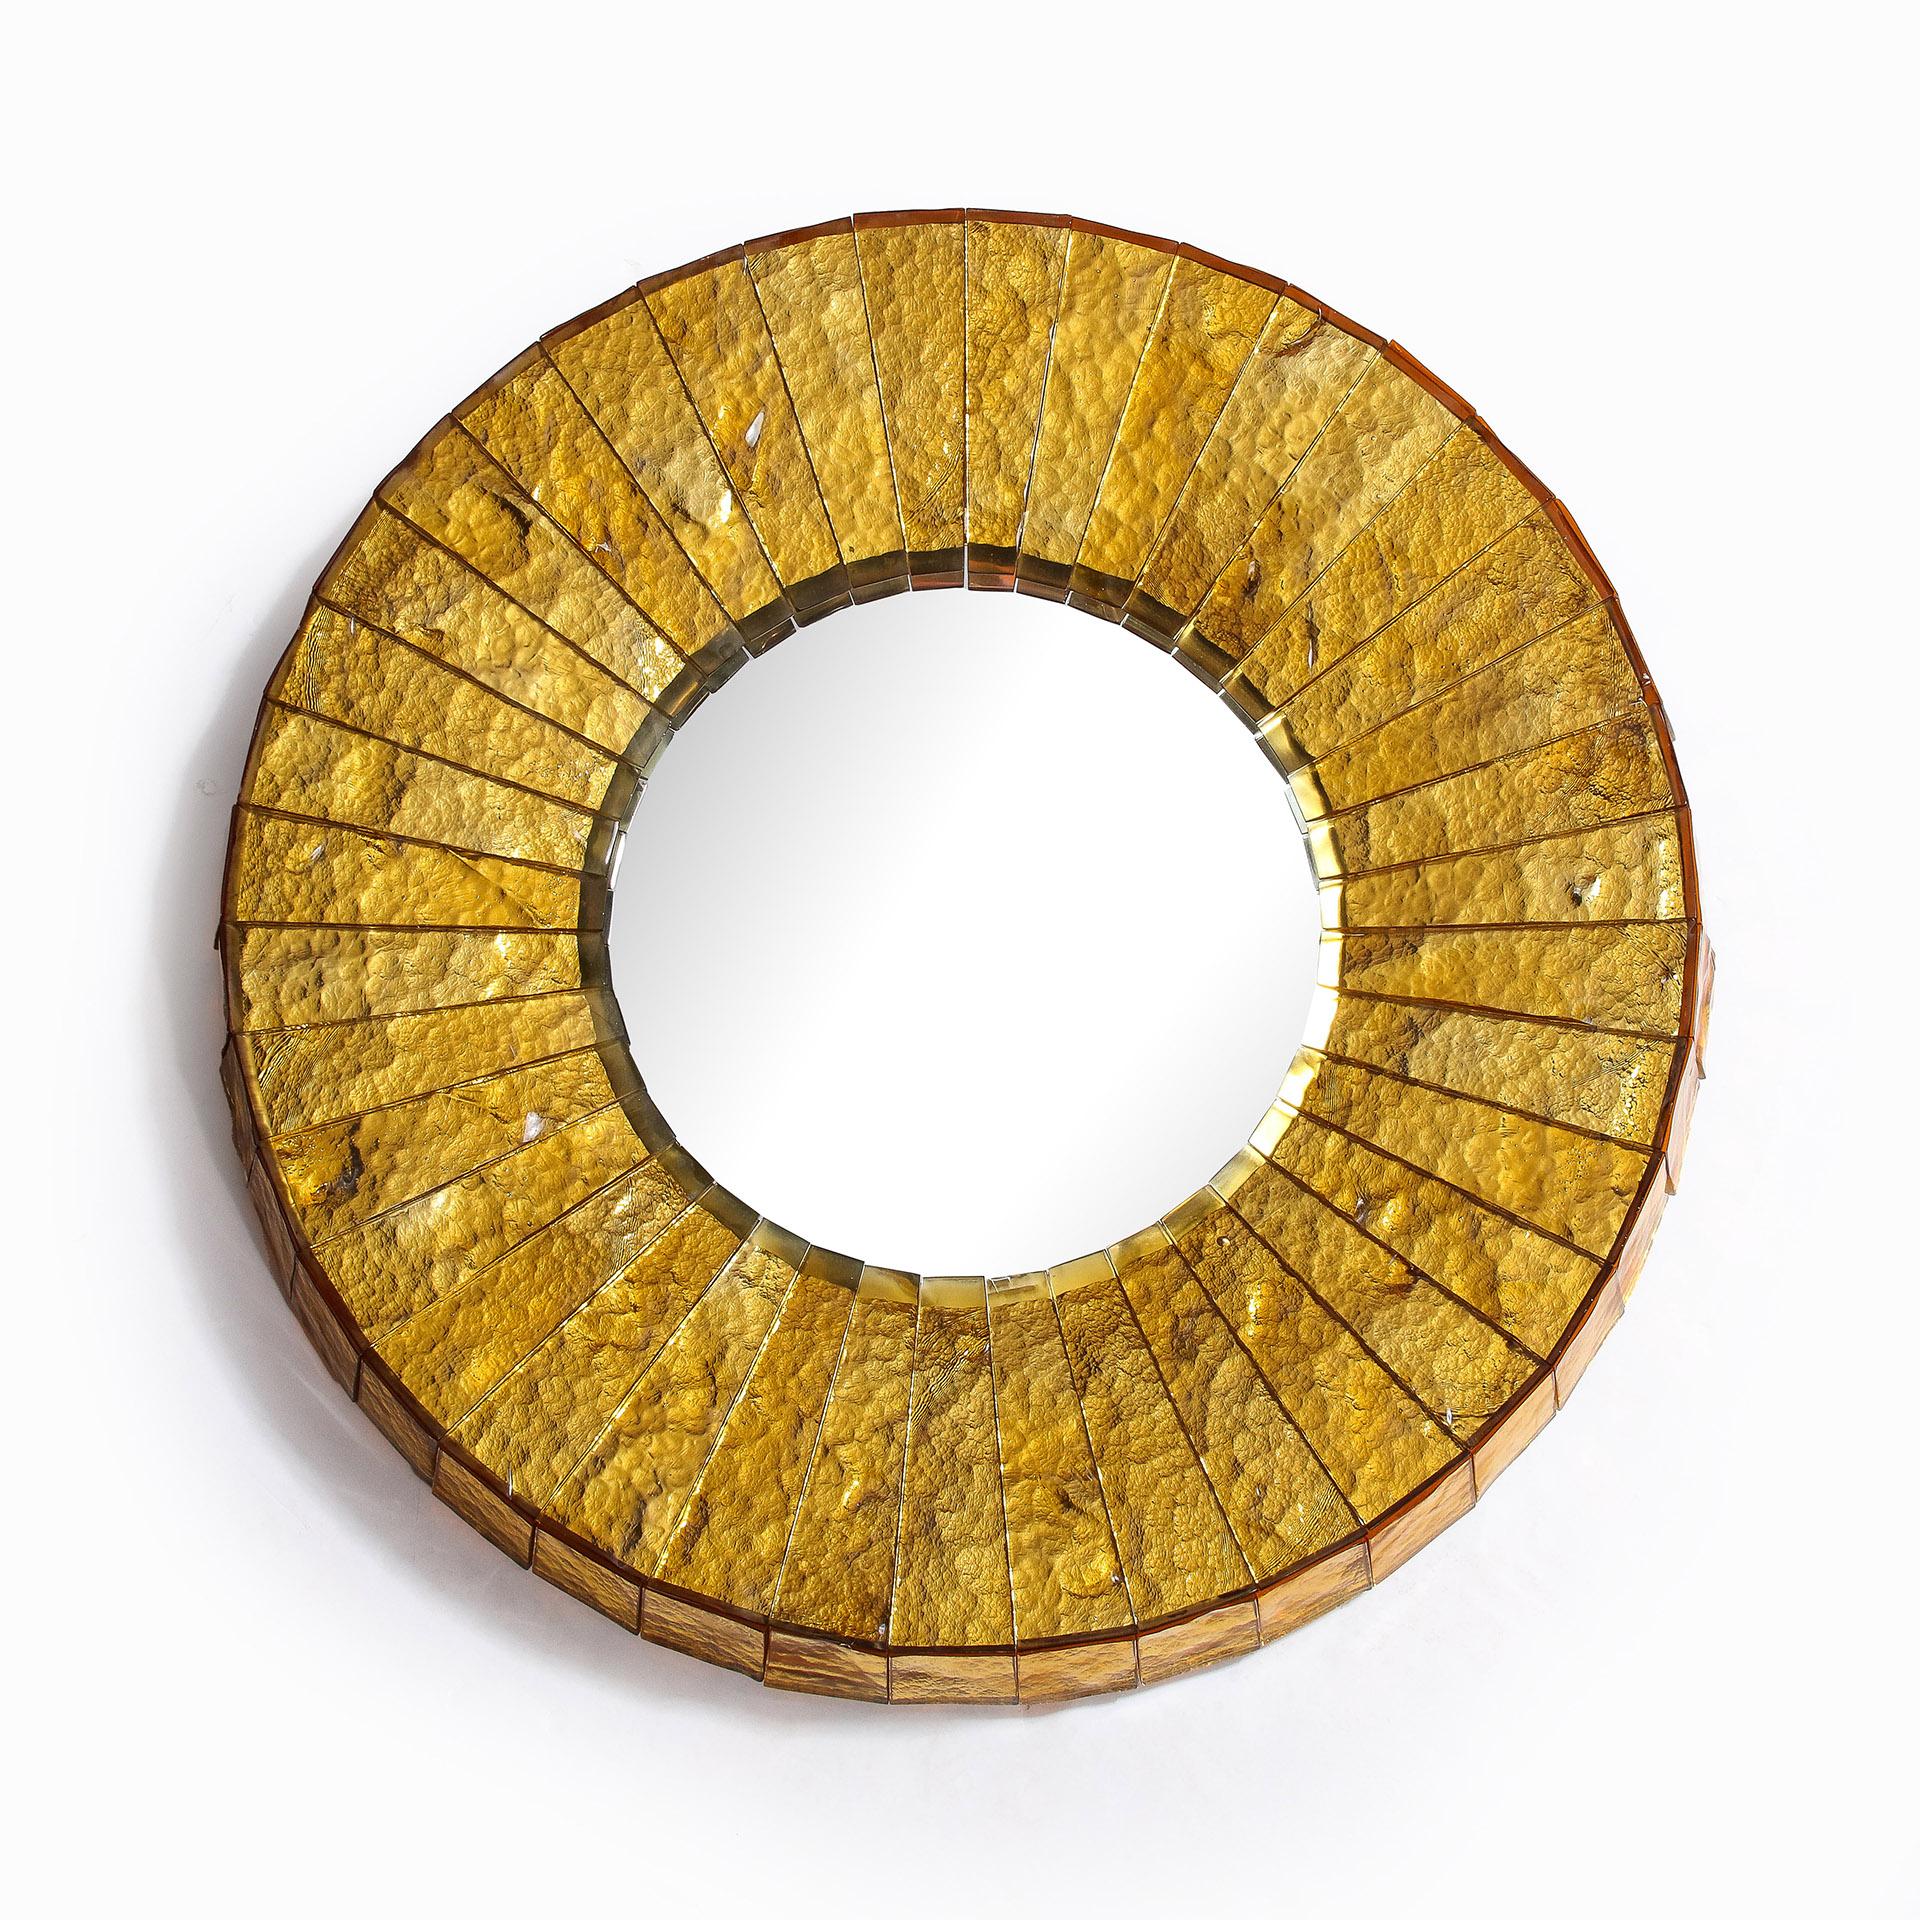 The round frame of hand-cut thick mirrored gold glass with chiseled sides of the same technique.